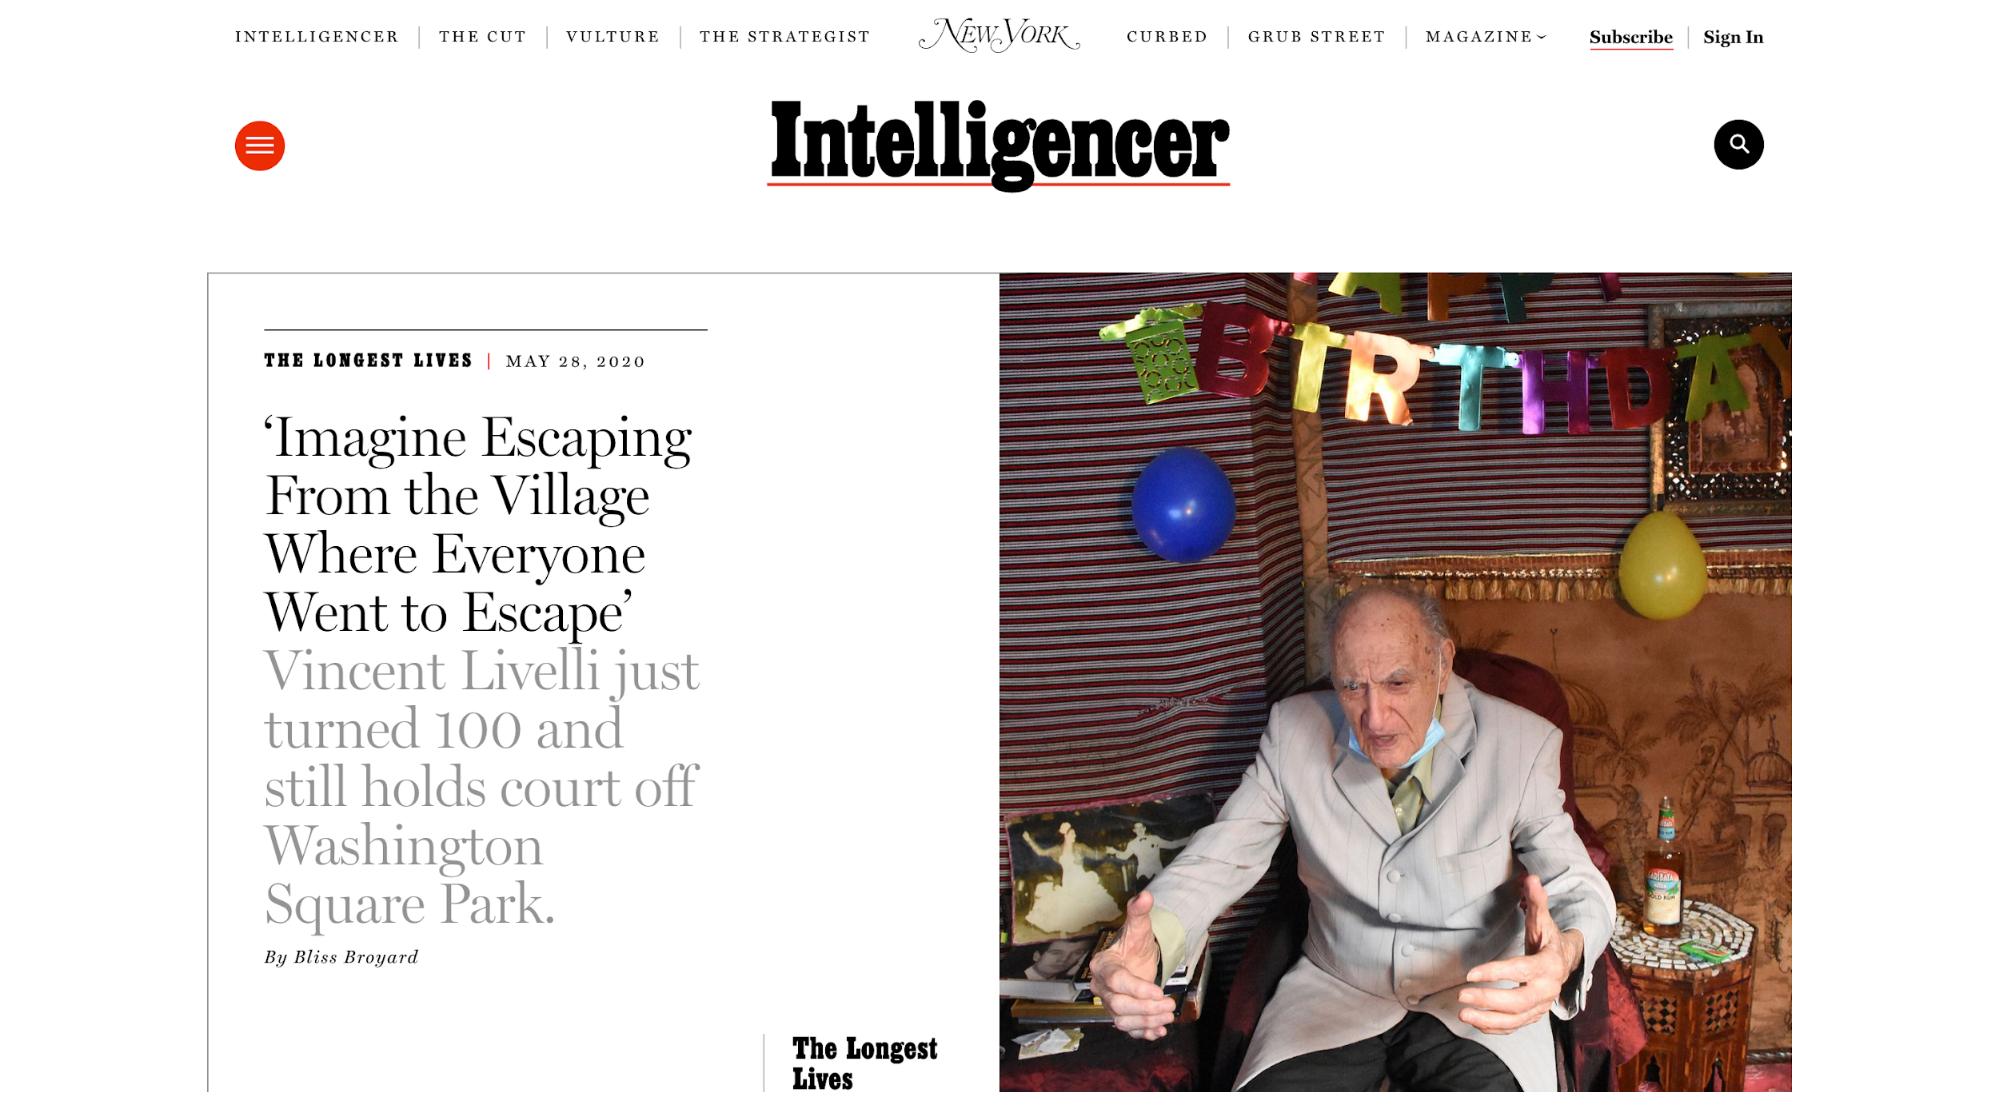 Vincent Livelli: A Village Icon.” New York Mag, May 28, 2020 (Copy)